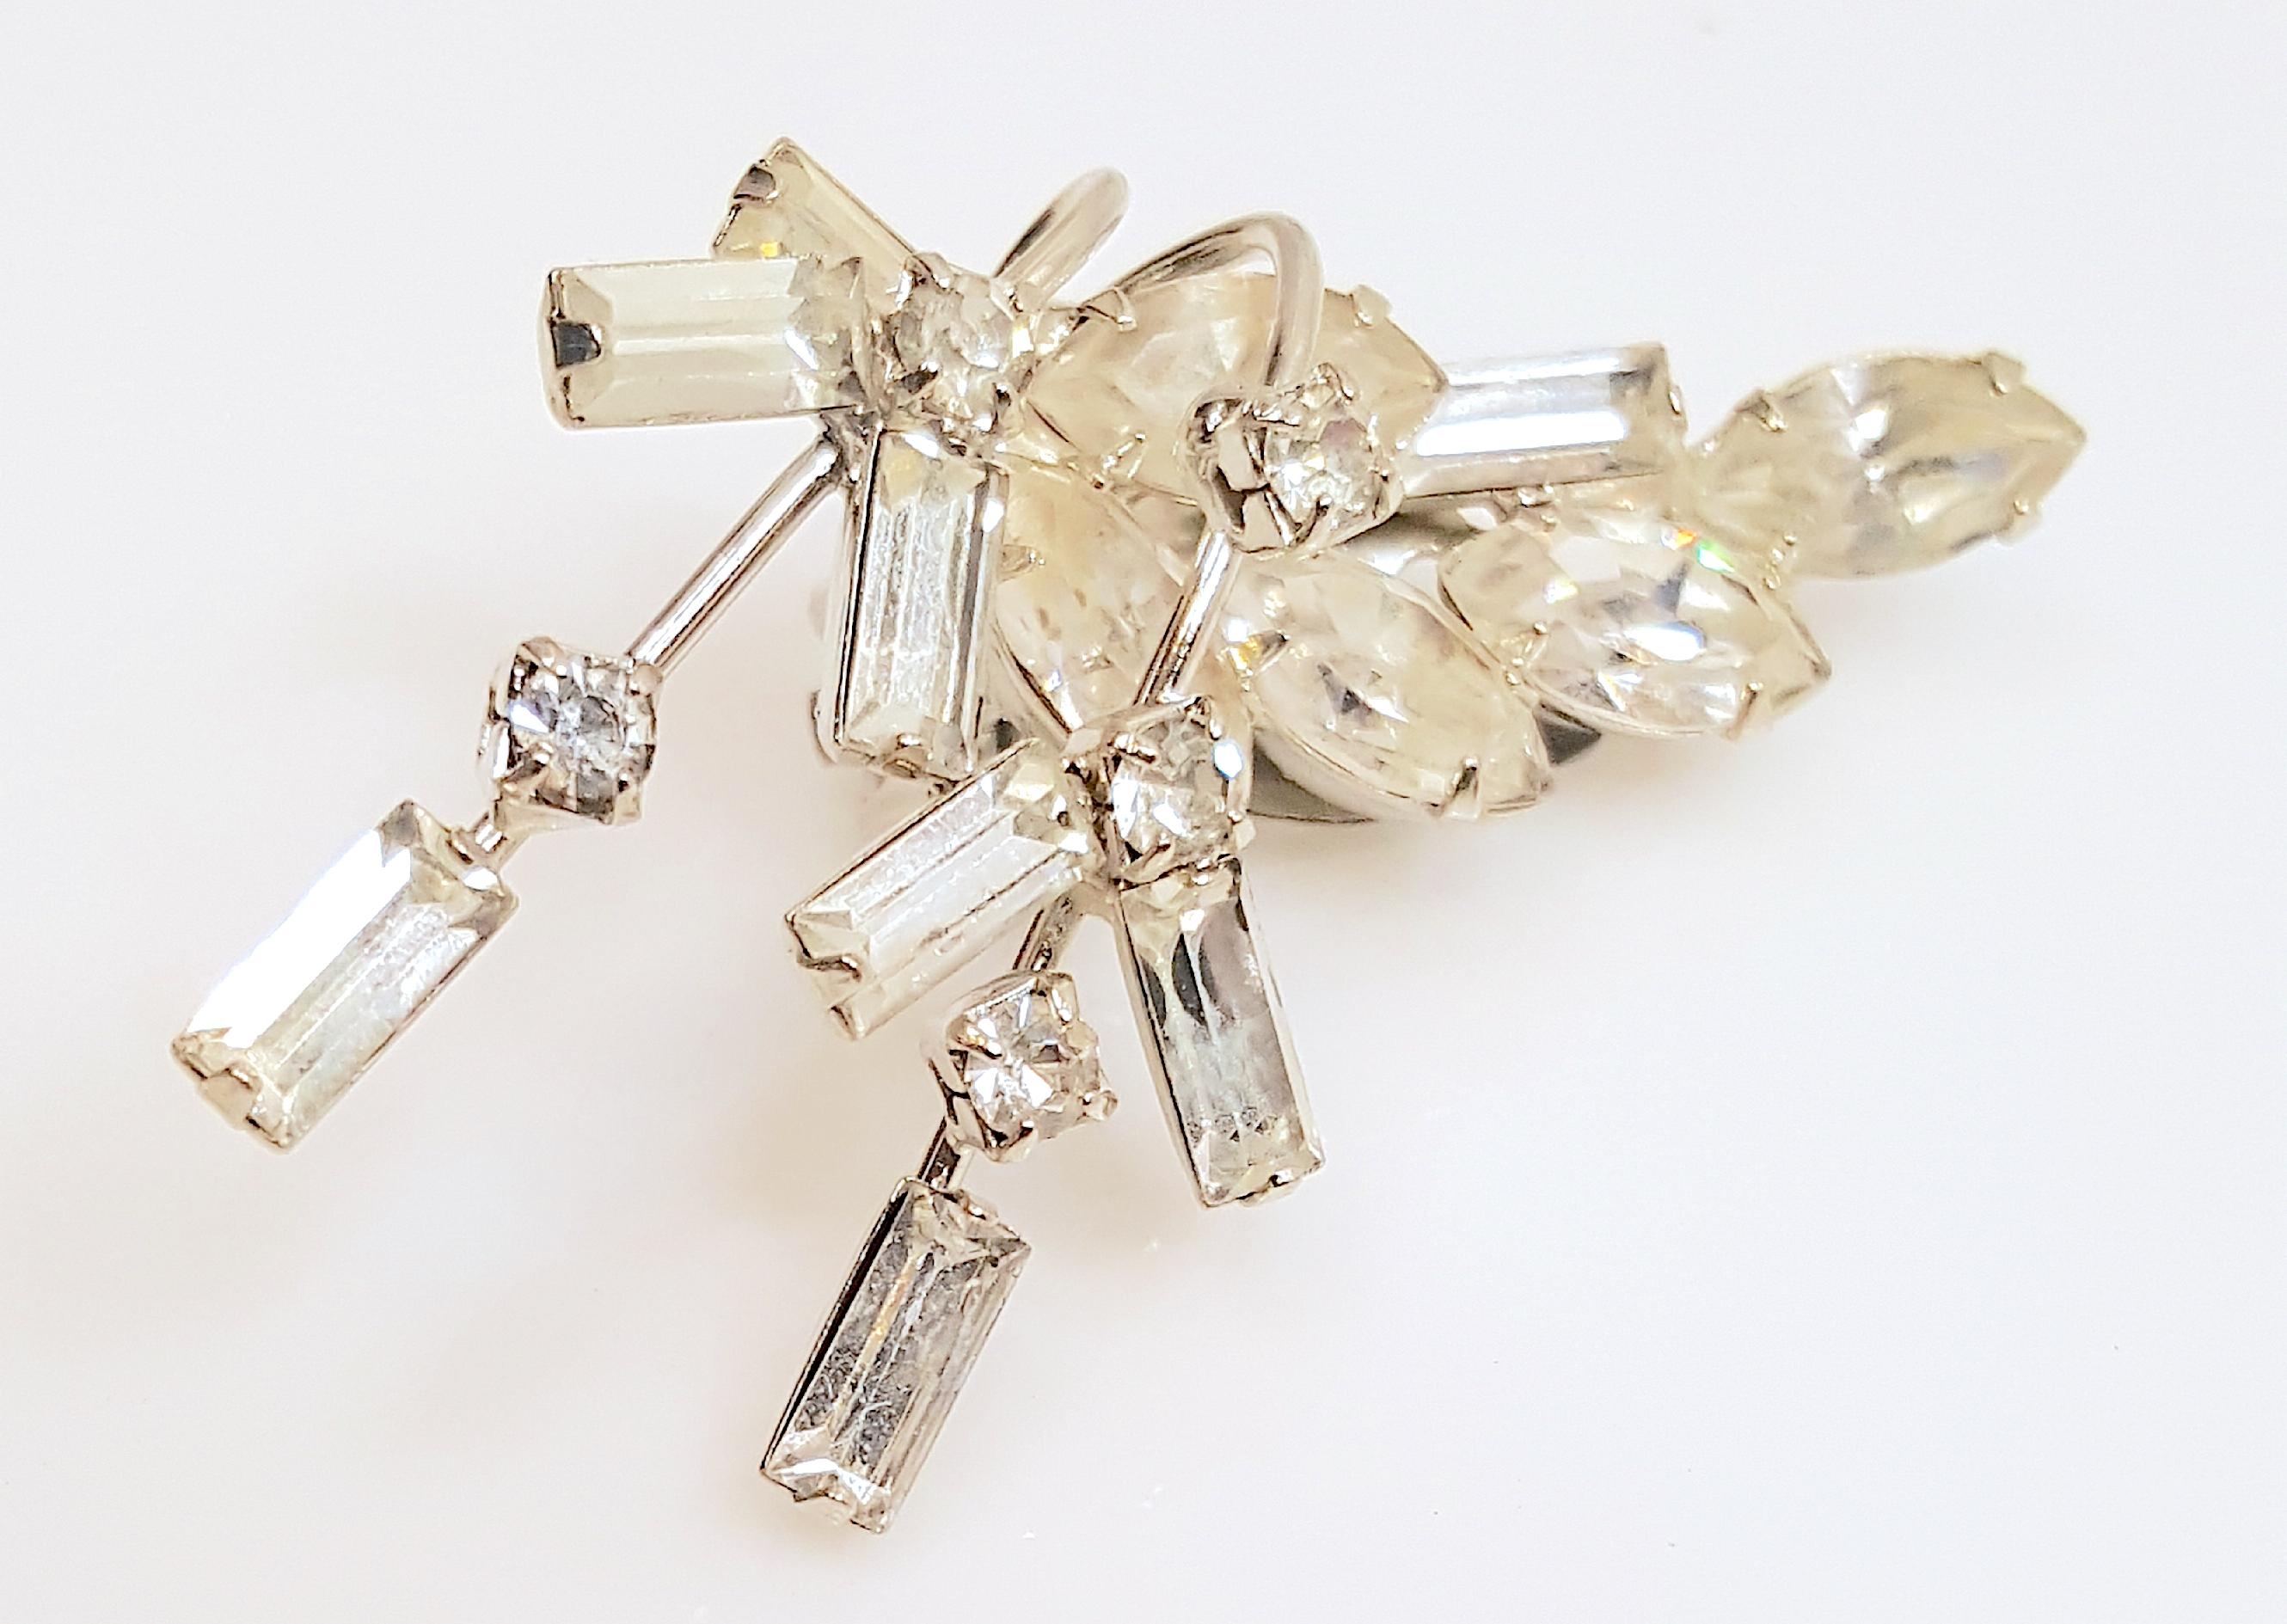 HenrySchreiner EarlySet ProngSetCrystal Silver Spray Tiered Earrings & Brooch  For Sale 4